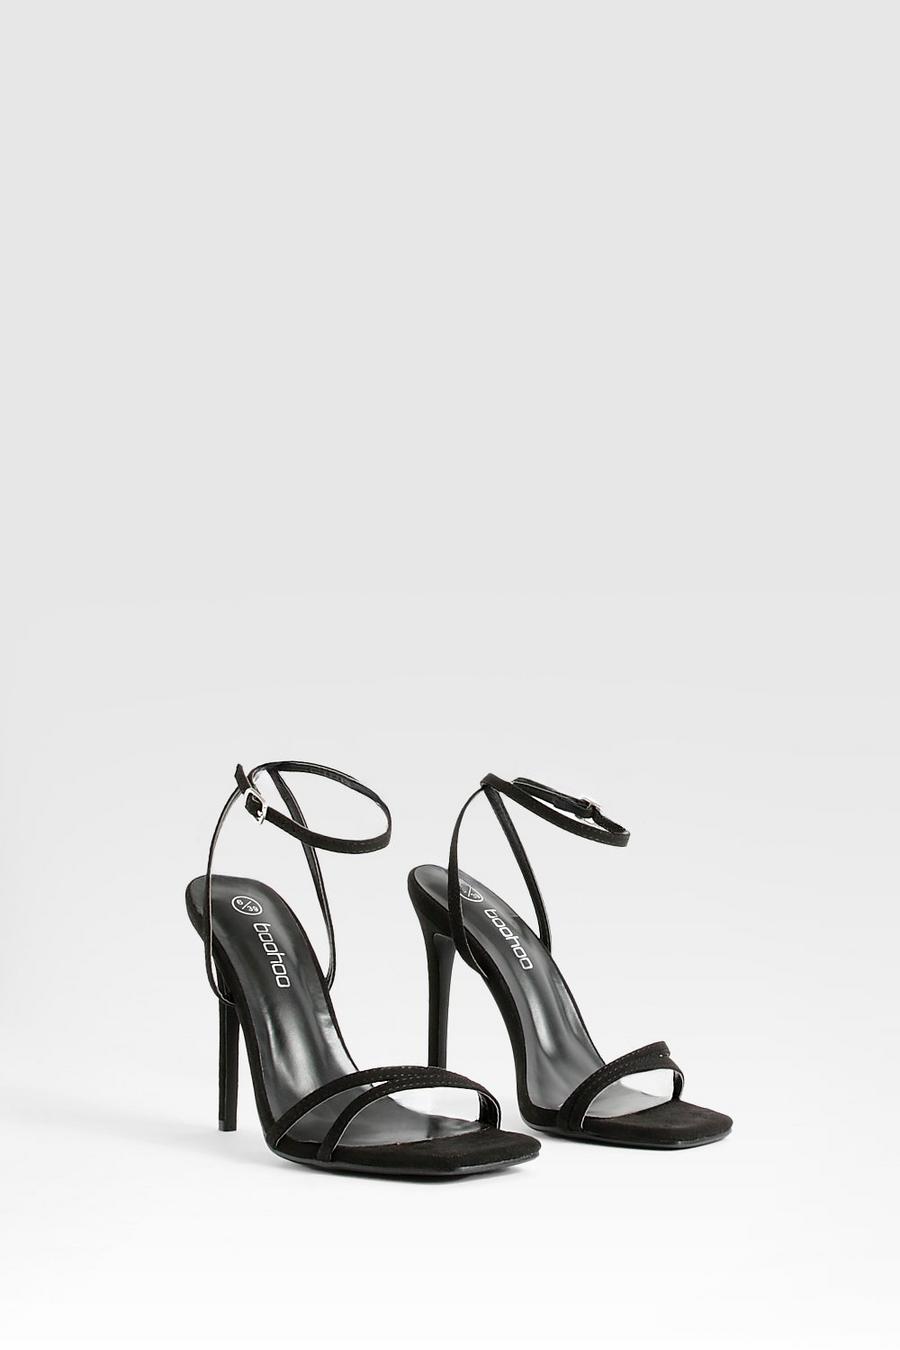 Black Double Strap Barely There Stiletto Heels